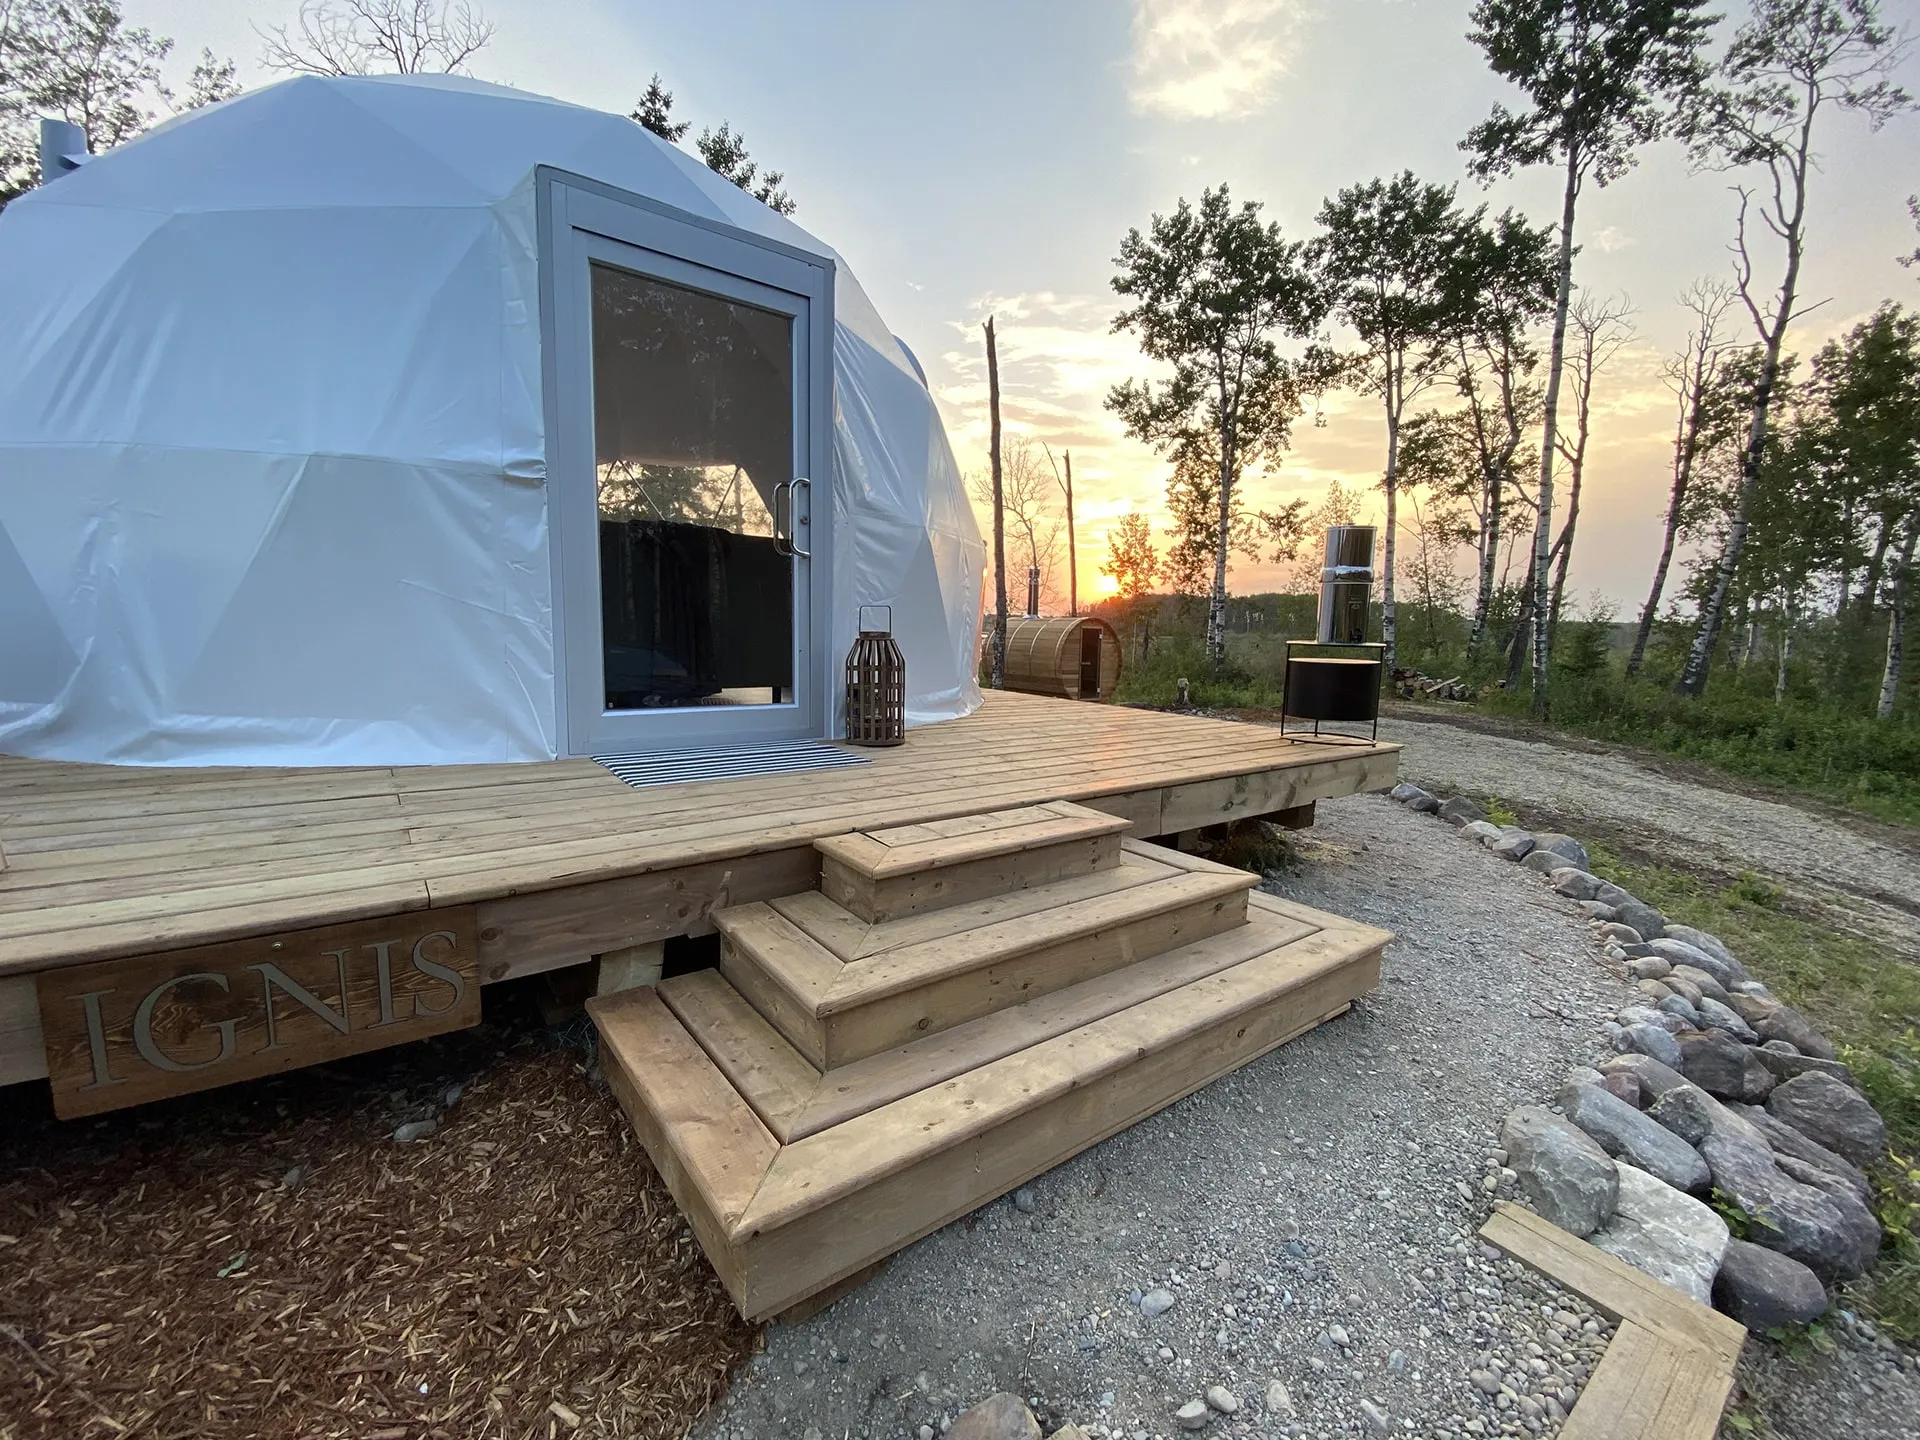 Close up front entrance of the ignis dome with front porch and outdoor dry sauna